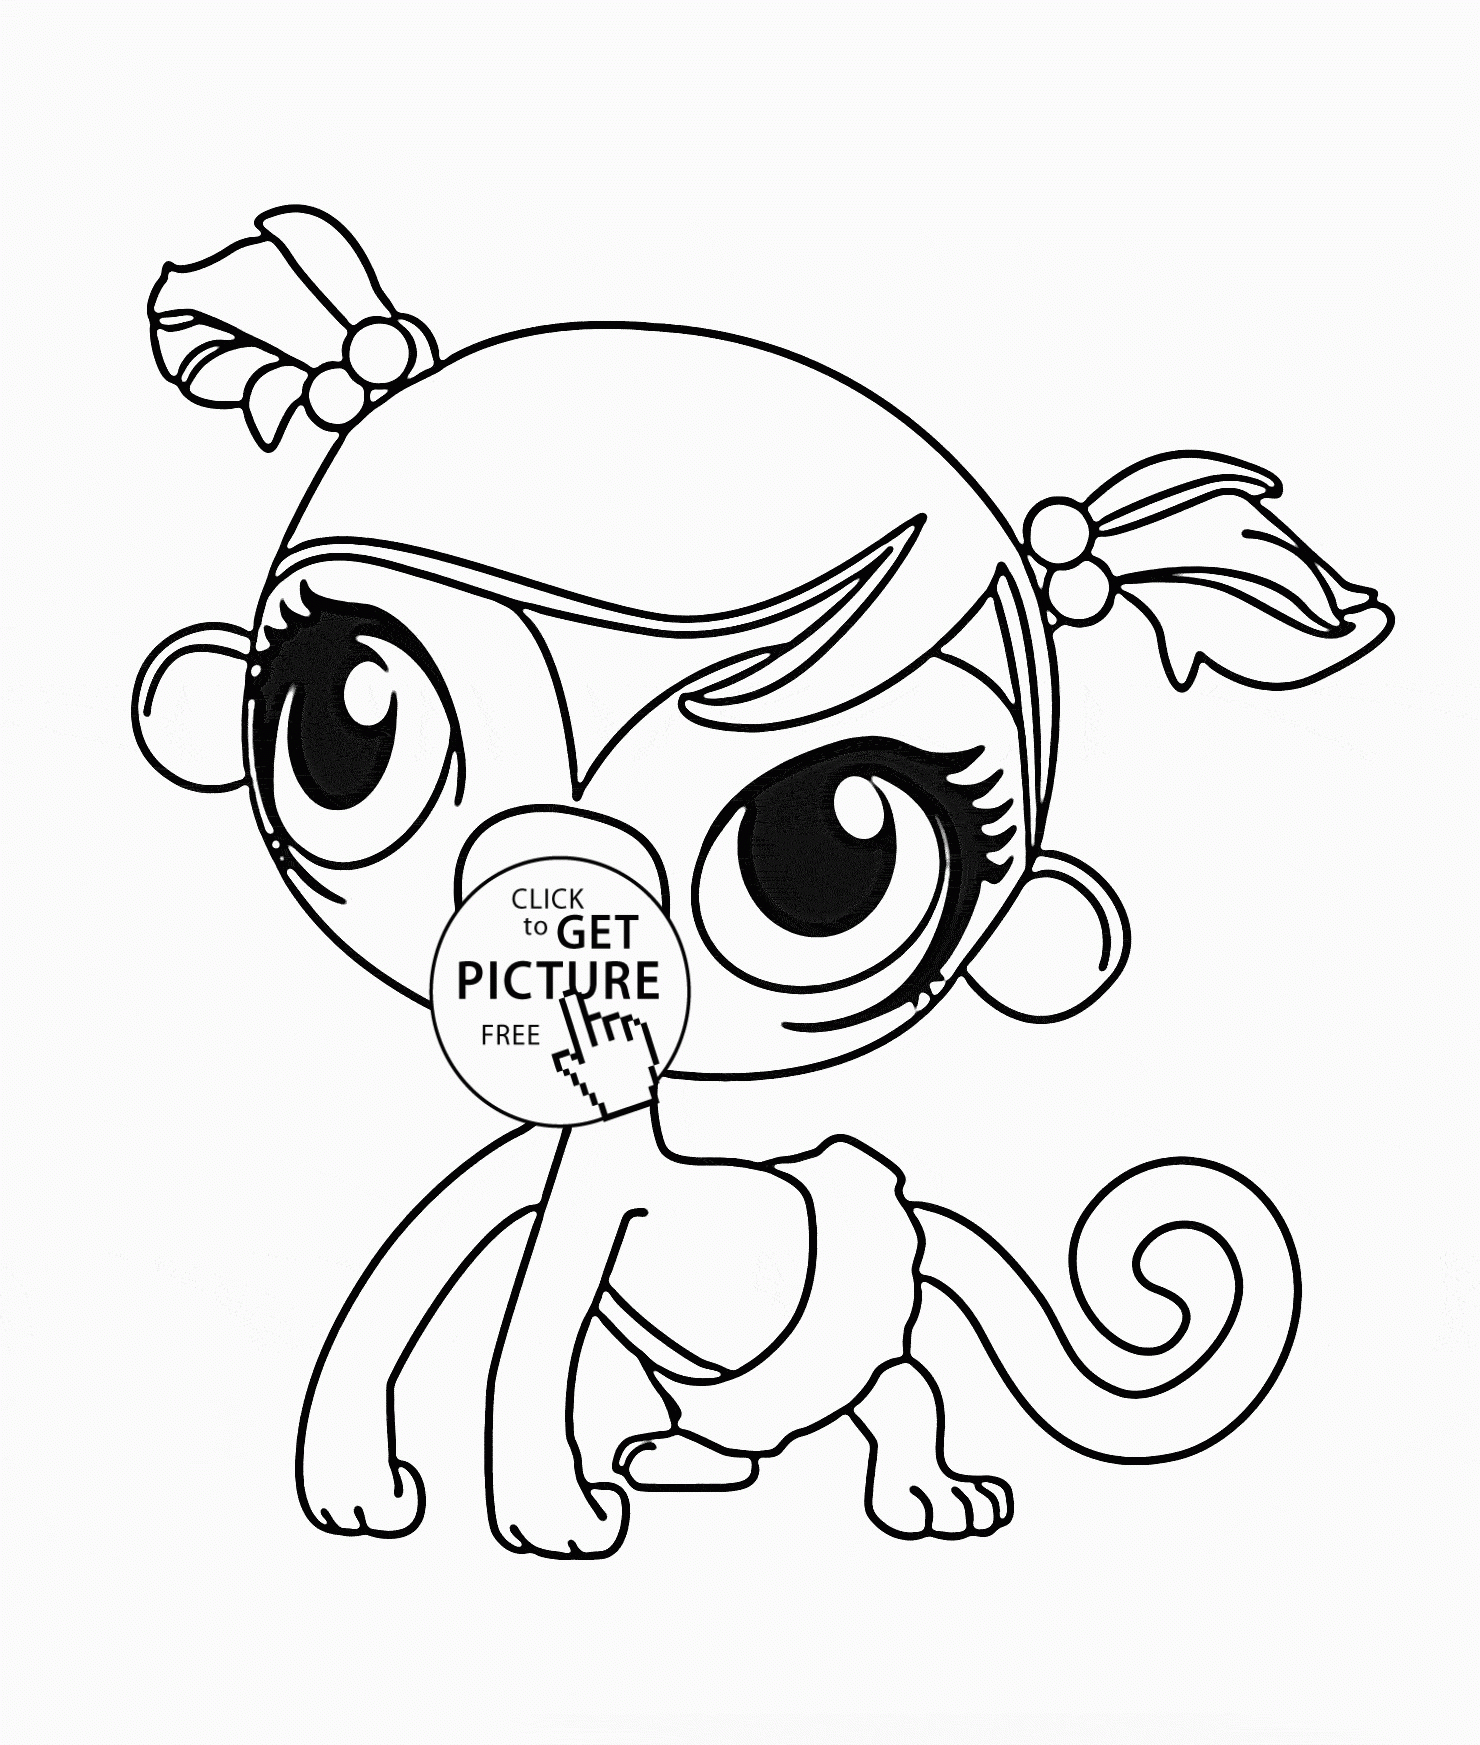 Littlest Pet Shop Cute Minka Coloring Page For Kids For Lps Coloring - Littlest Pet Shop Free Printable Coloring Pages